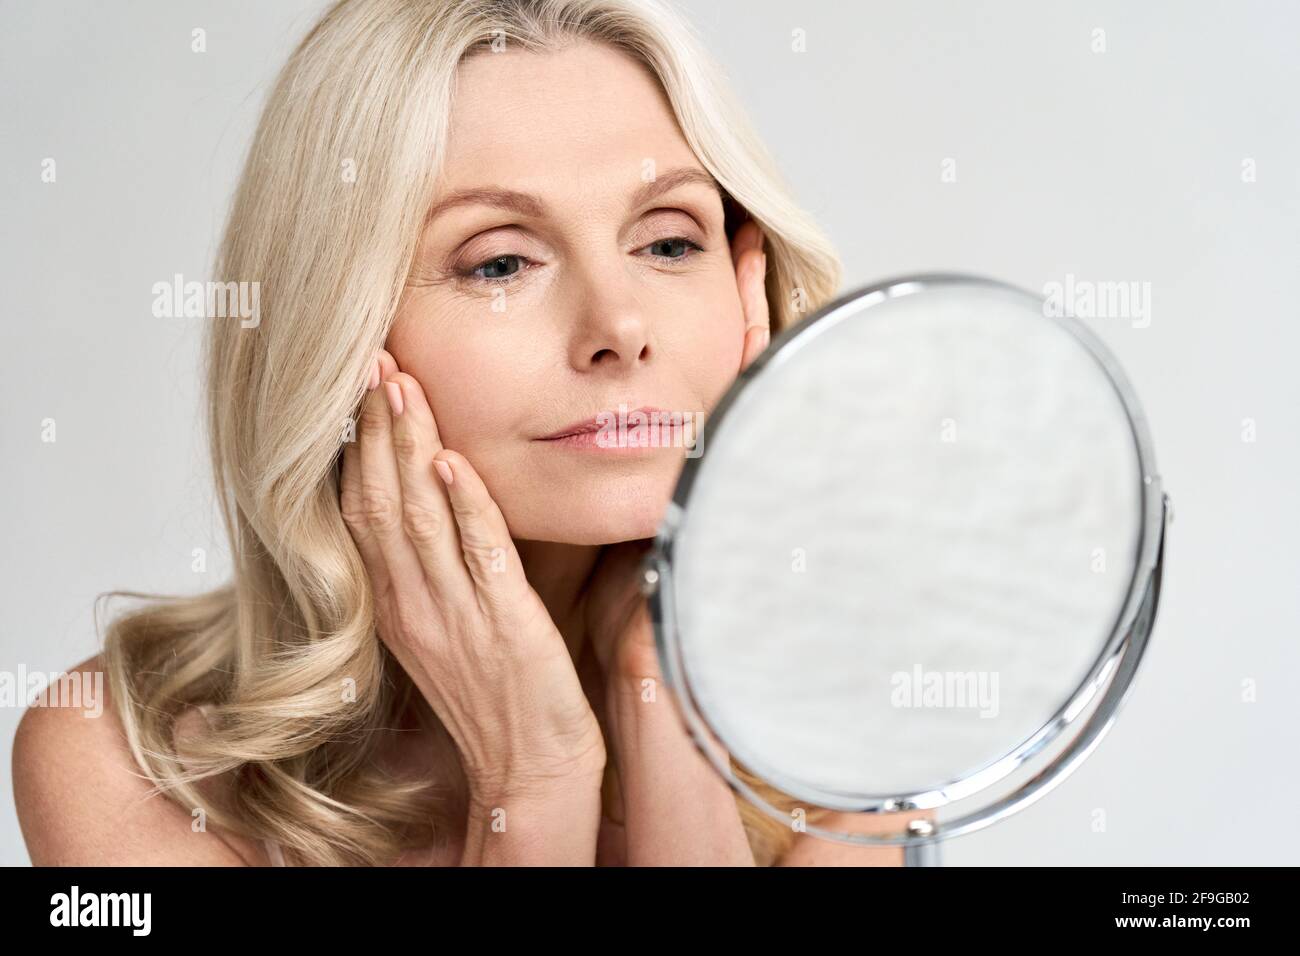 Closeup portrait middle age 50 woman looking at mirror, touching healthy skin. Stock Photo